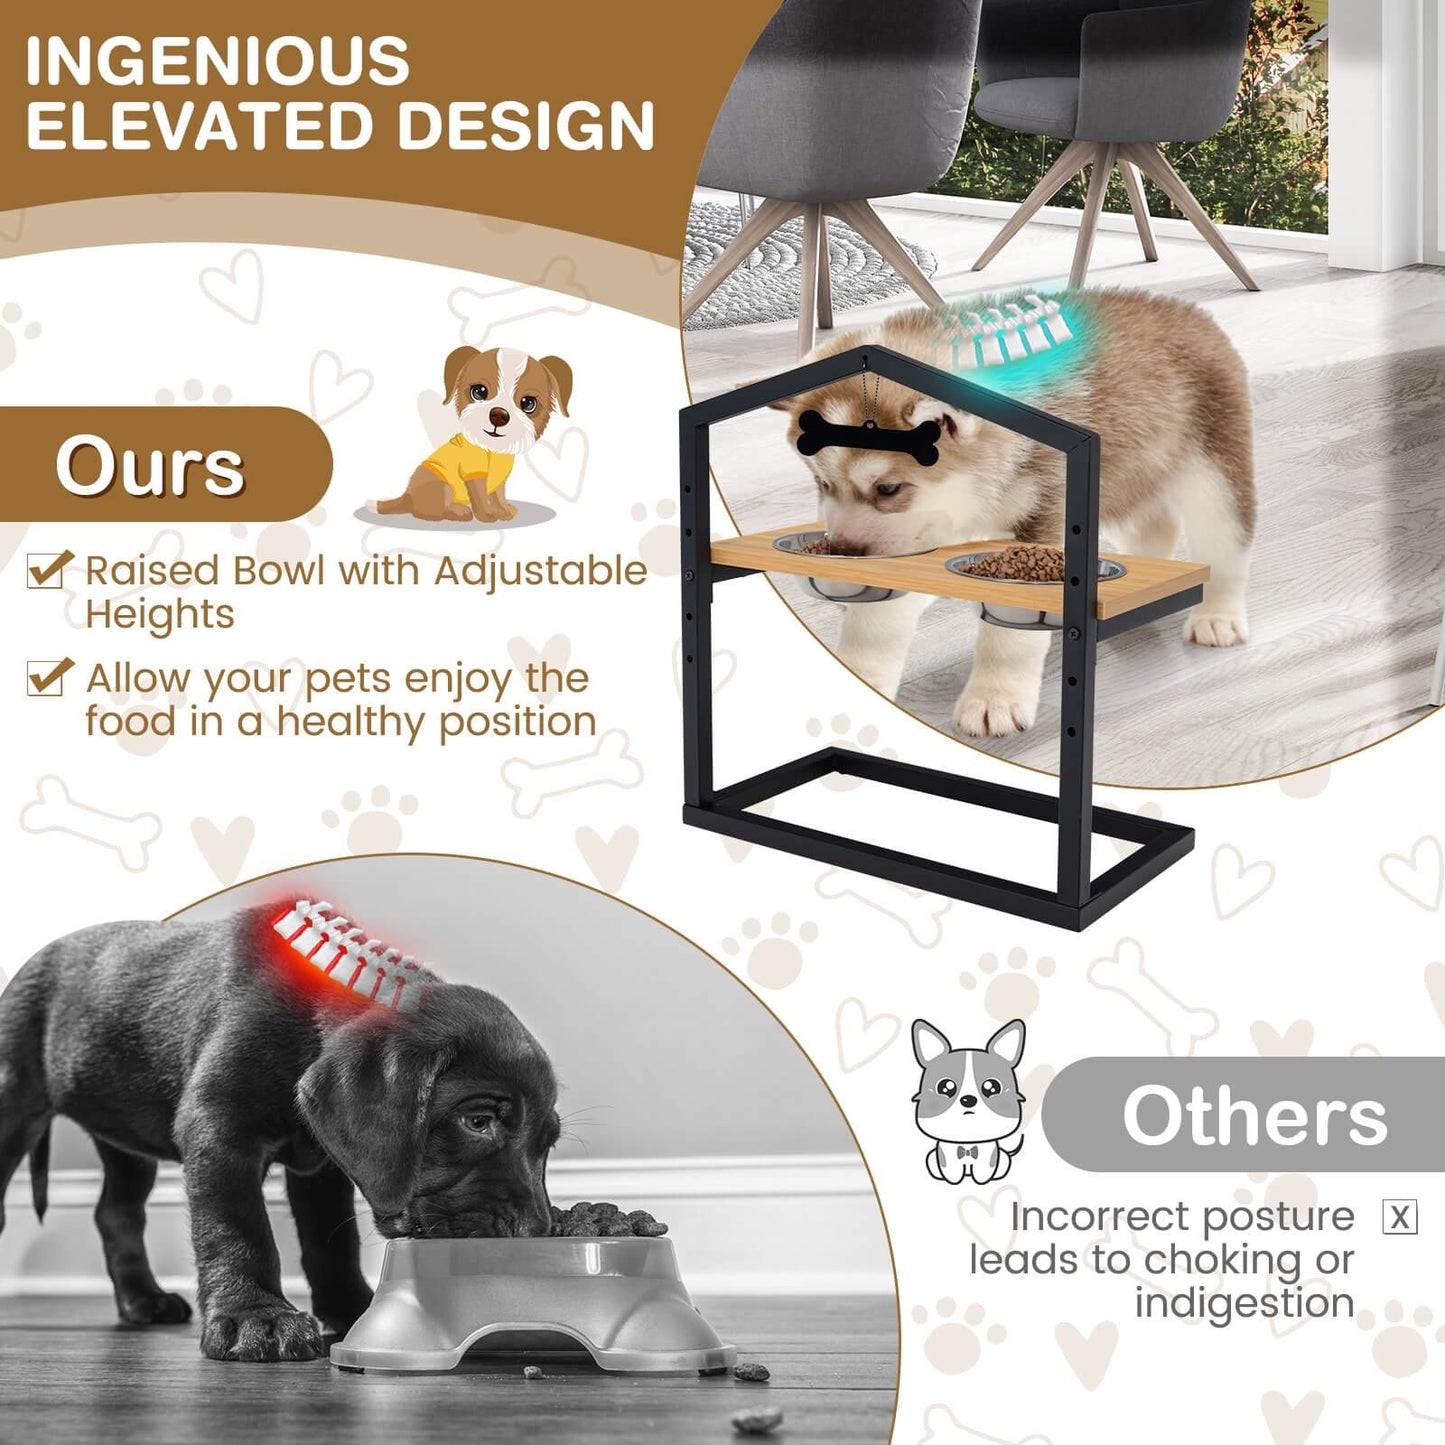 5 Heights Elevated Pet Feeder with 2 Detachable Stainless Steel Bowl, Natural